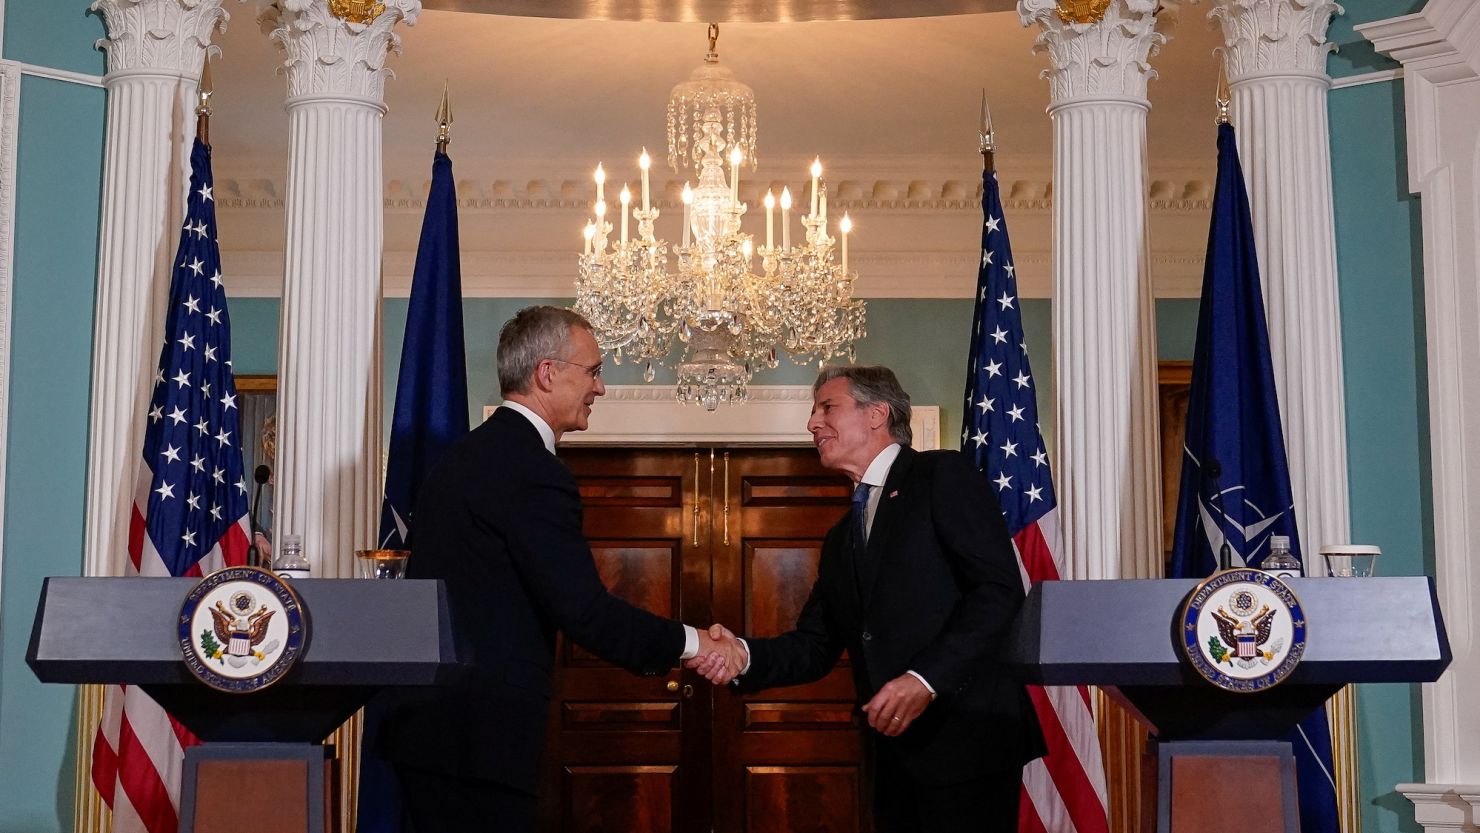 U.S. Secretary of State Antony Blinken and NATO Secretary General Jens Stoltenberg shake hands at the conclusion of a joint news conference at the State Department in Washington on June 18, 2024.